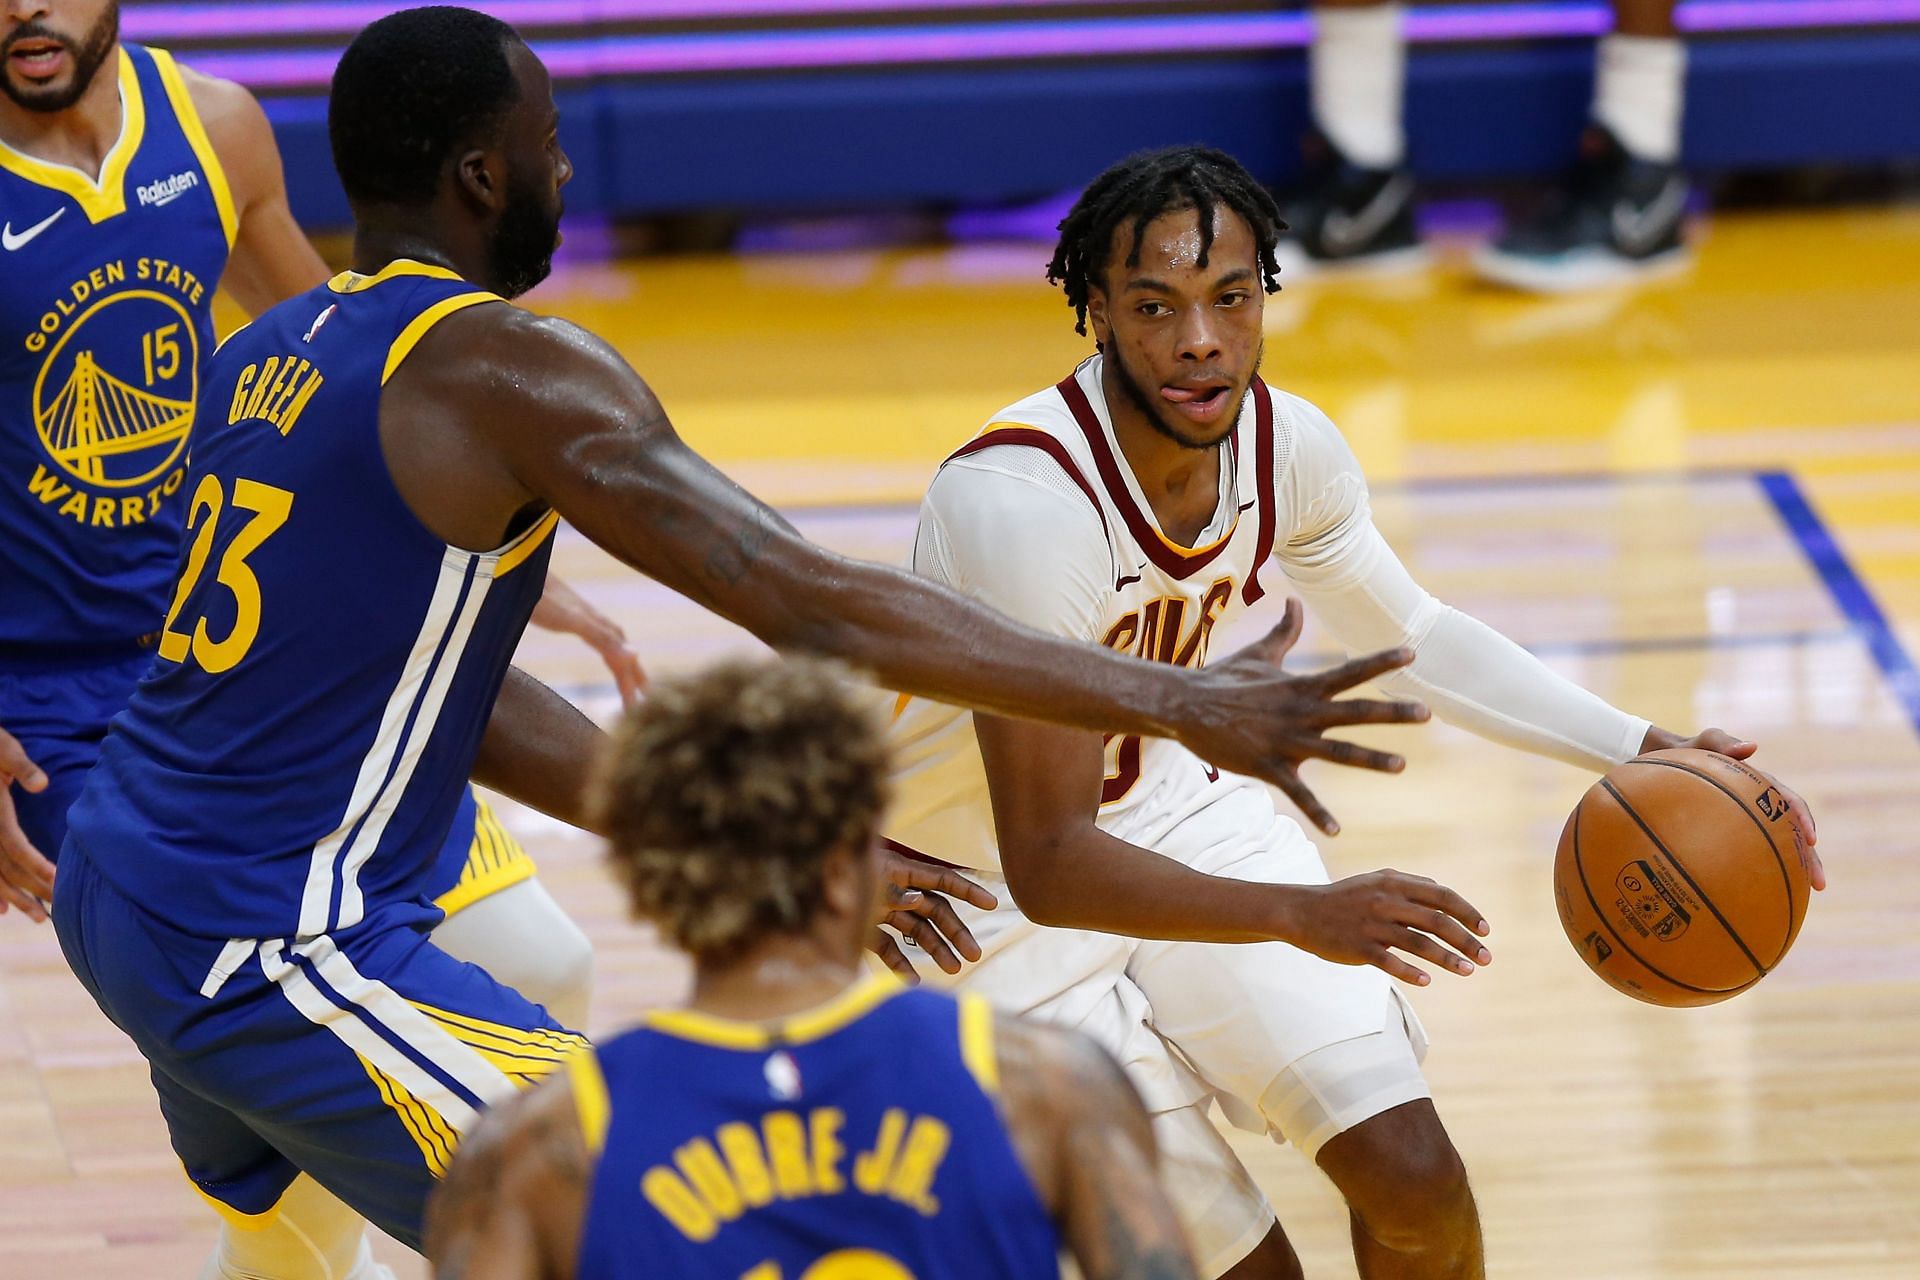 Cleveland Cavaliers will host the Golden State Warriors on November 18th in a regular-season game.